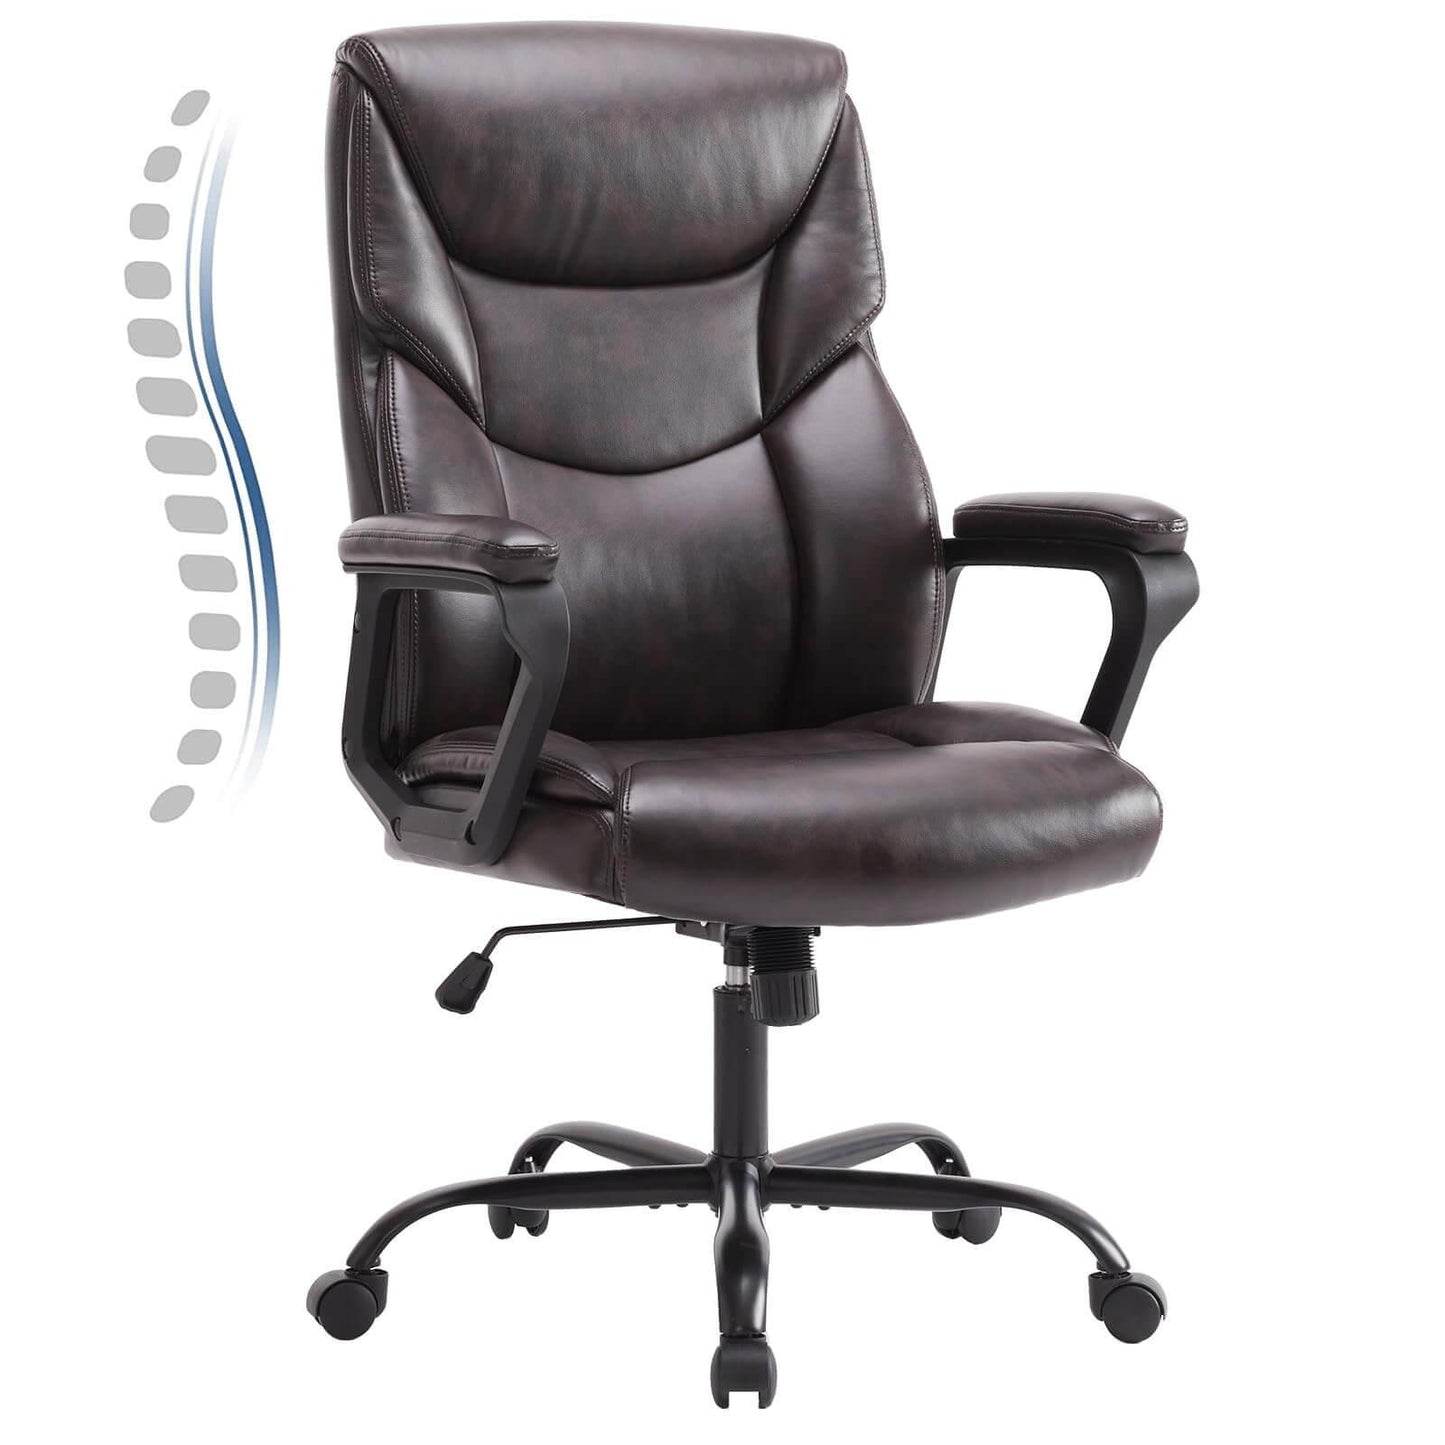 Tall Executive Office Chair with High Back and Wide Seat